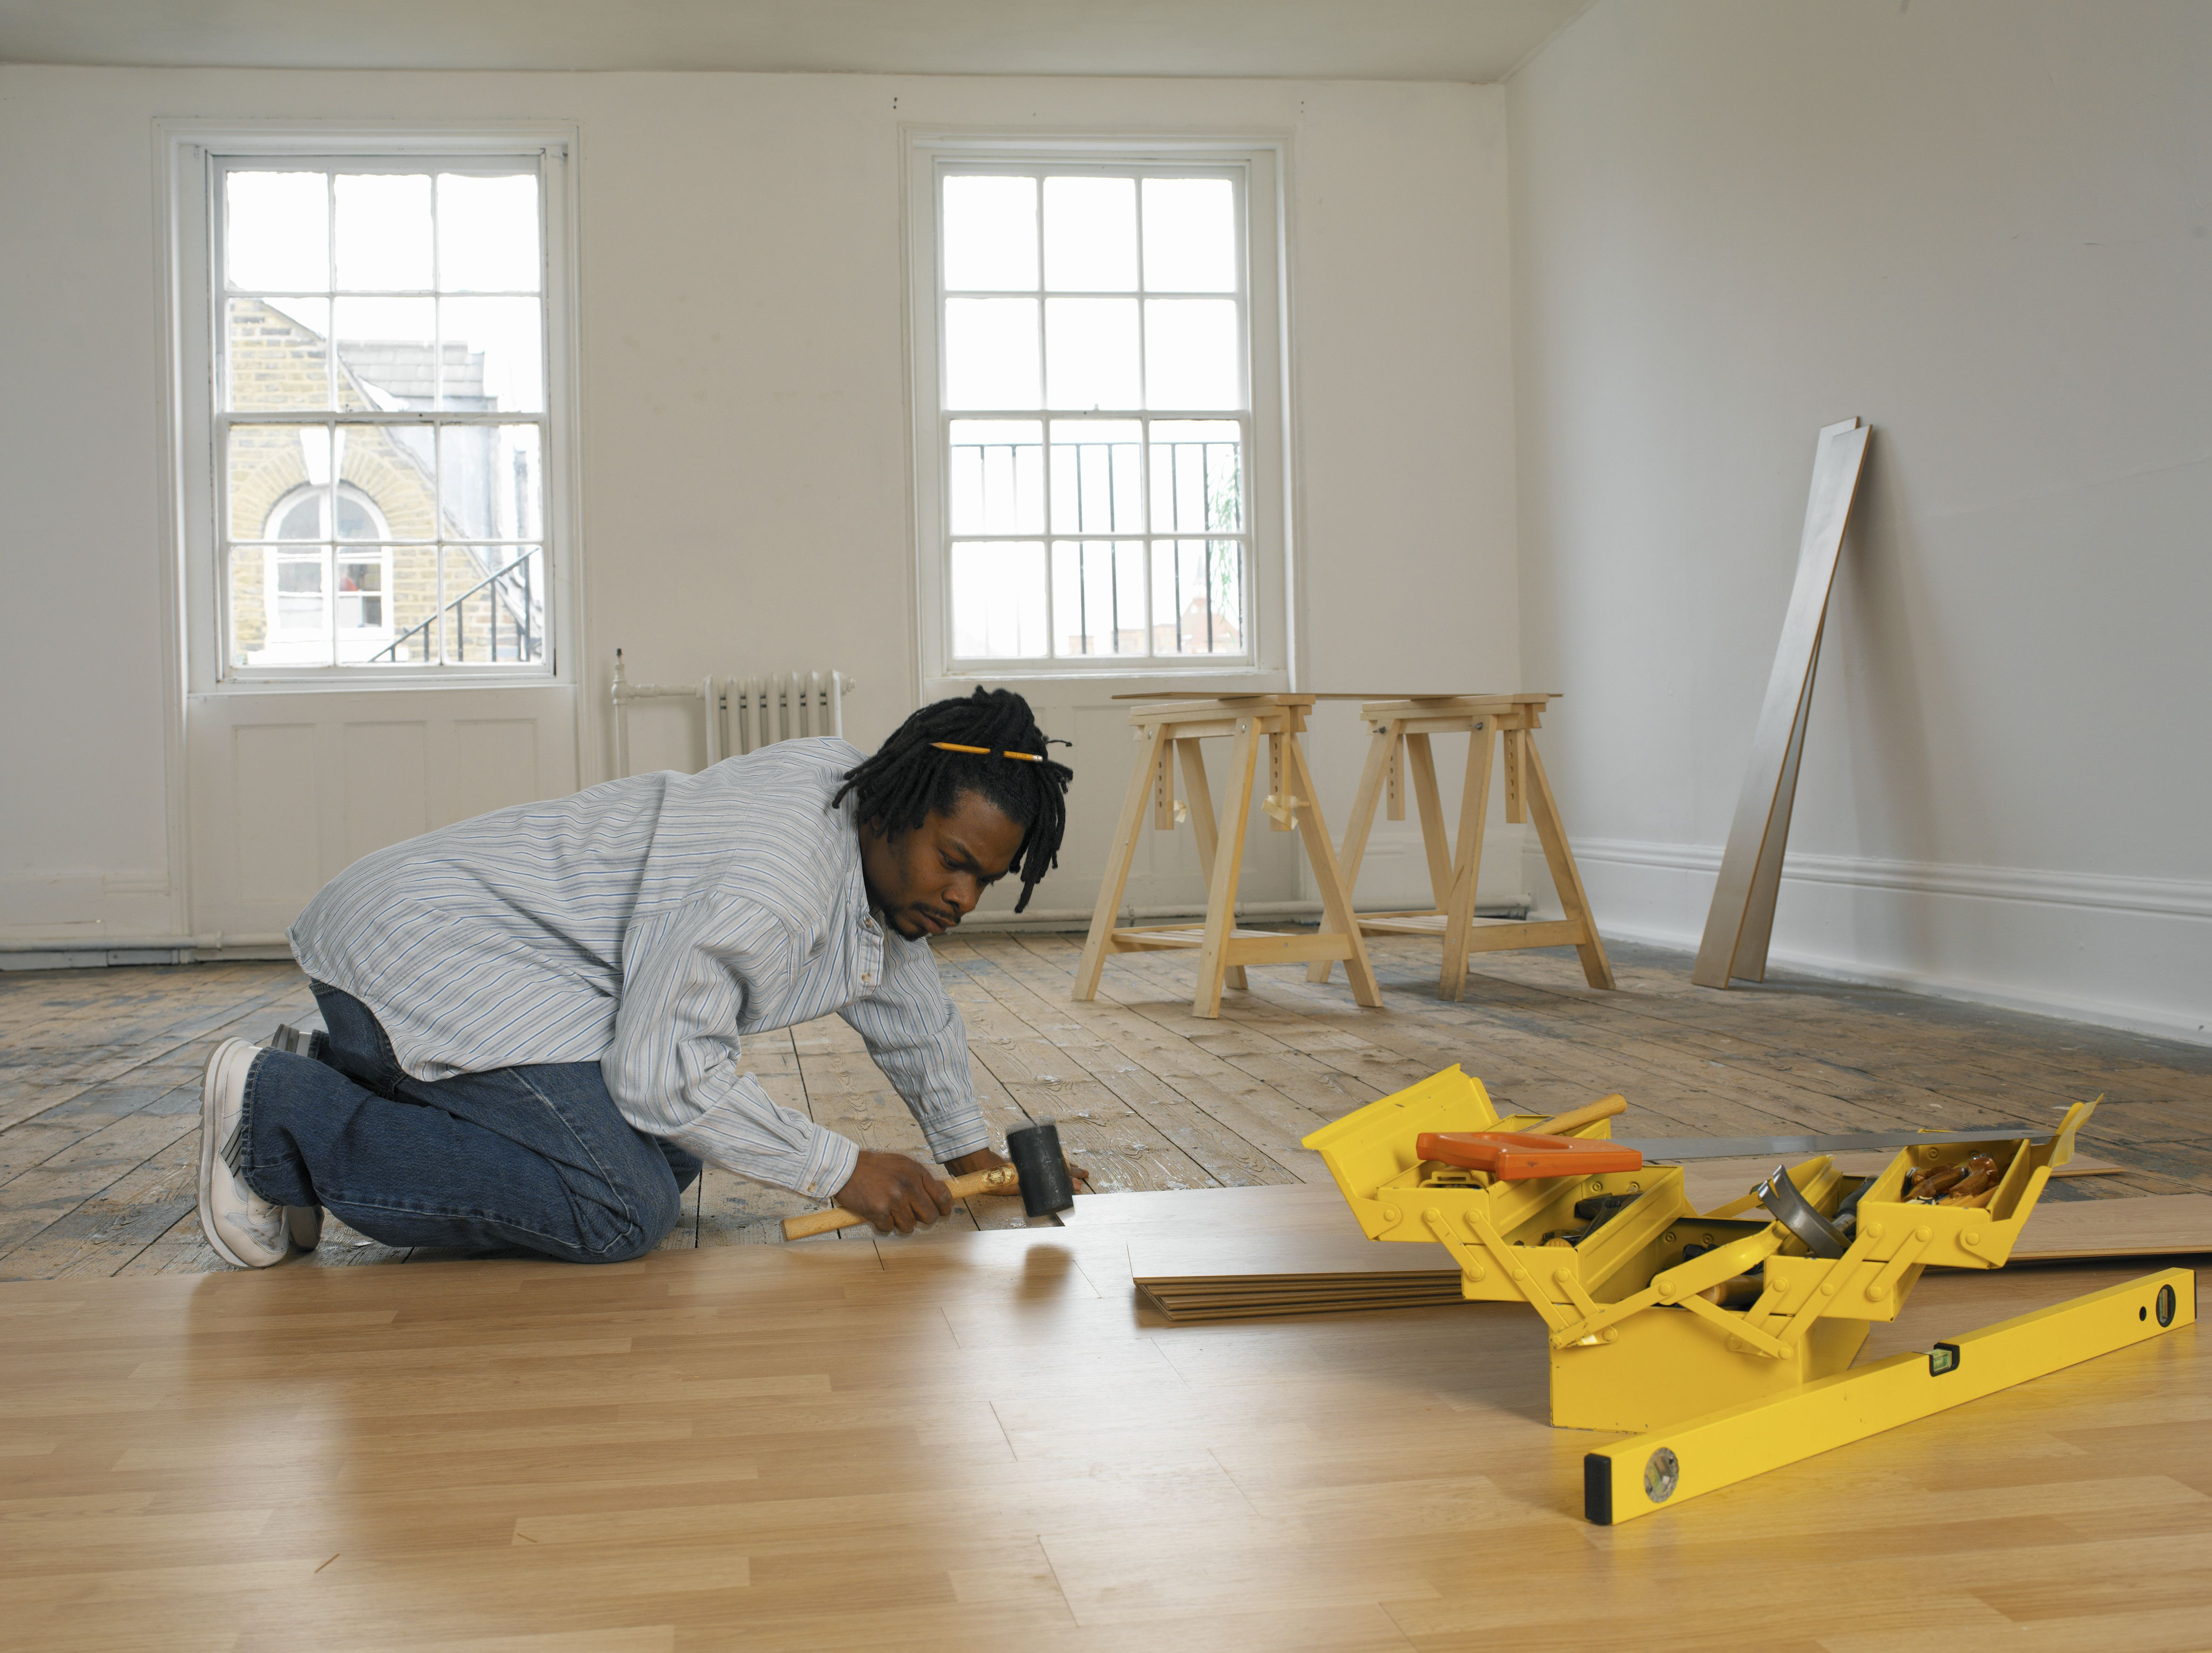 11 Best Cost Of Oak Hardwood Floors Installed Per Square Foot 2022 free download cost of oak hardwood floors installed per square foot of ikea flooring review overview pertaining to young man laying floor 200199826 001 57e96a973df78c690f719440